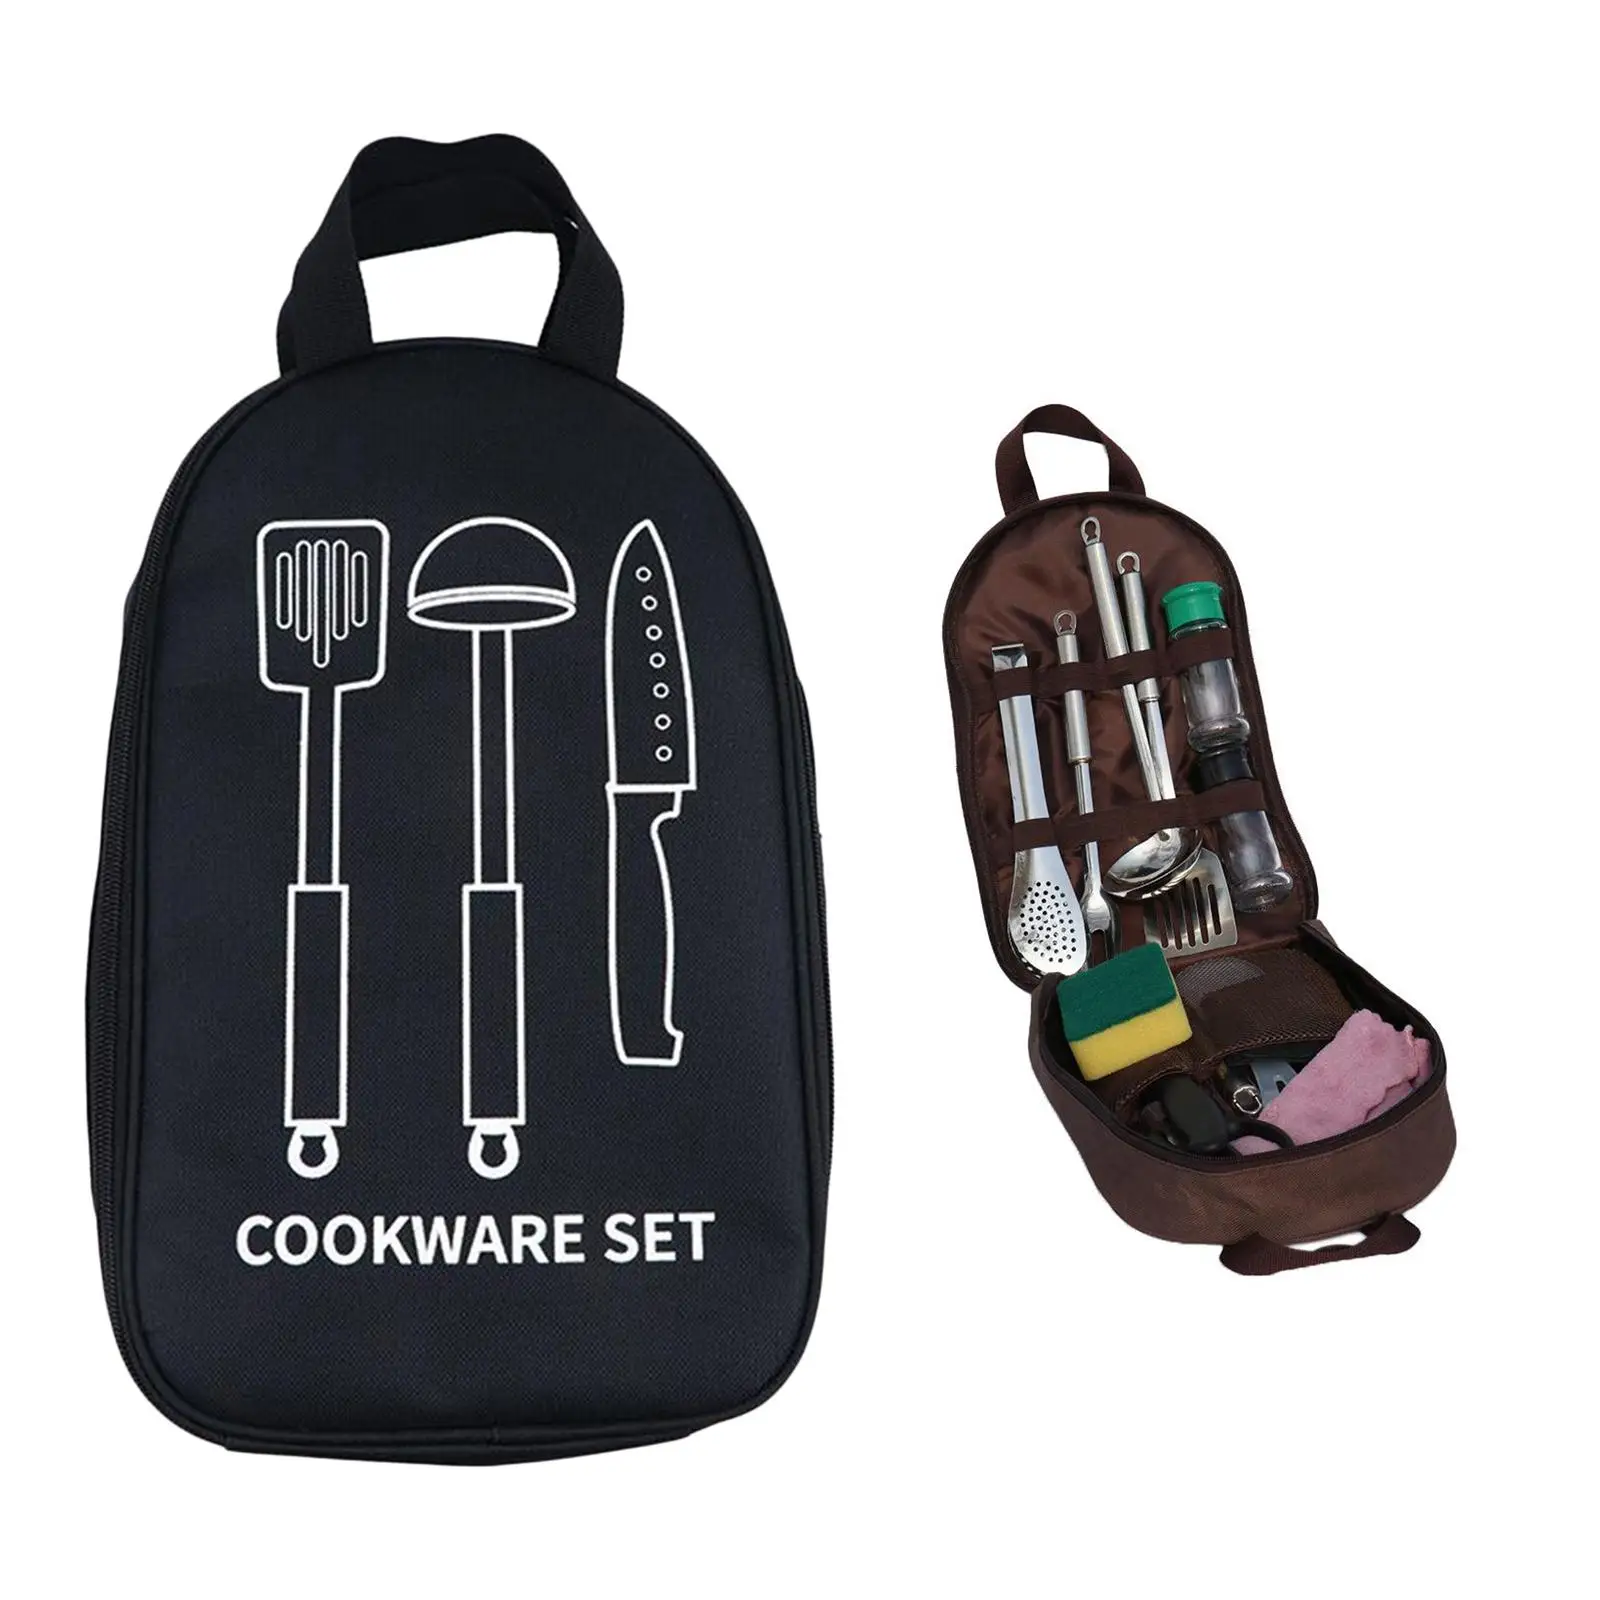 Utensil Organizer Cookware Storage Bag Tools BBQ Tidy Carrier